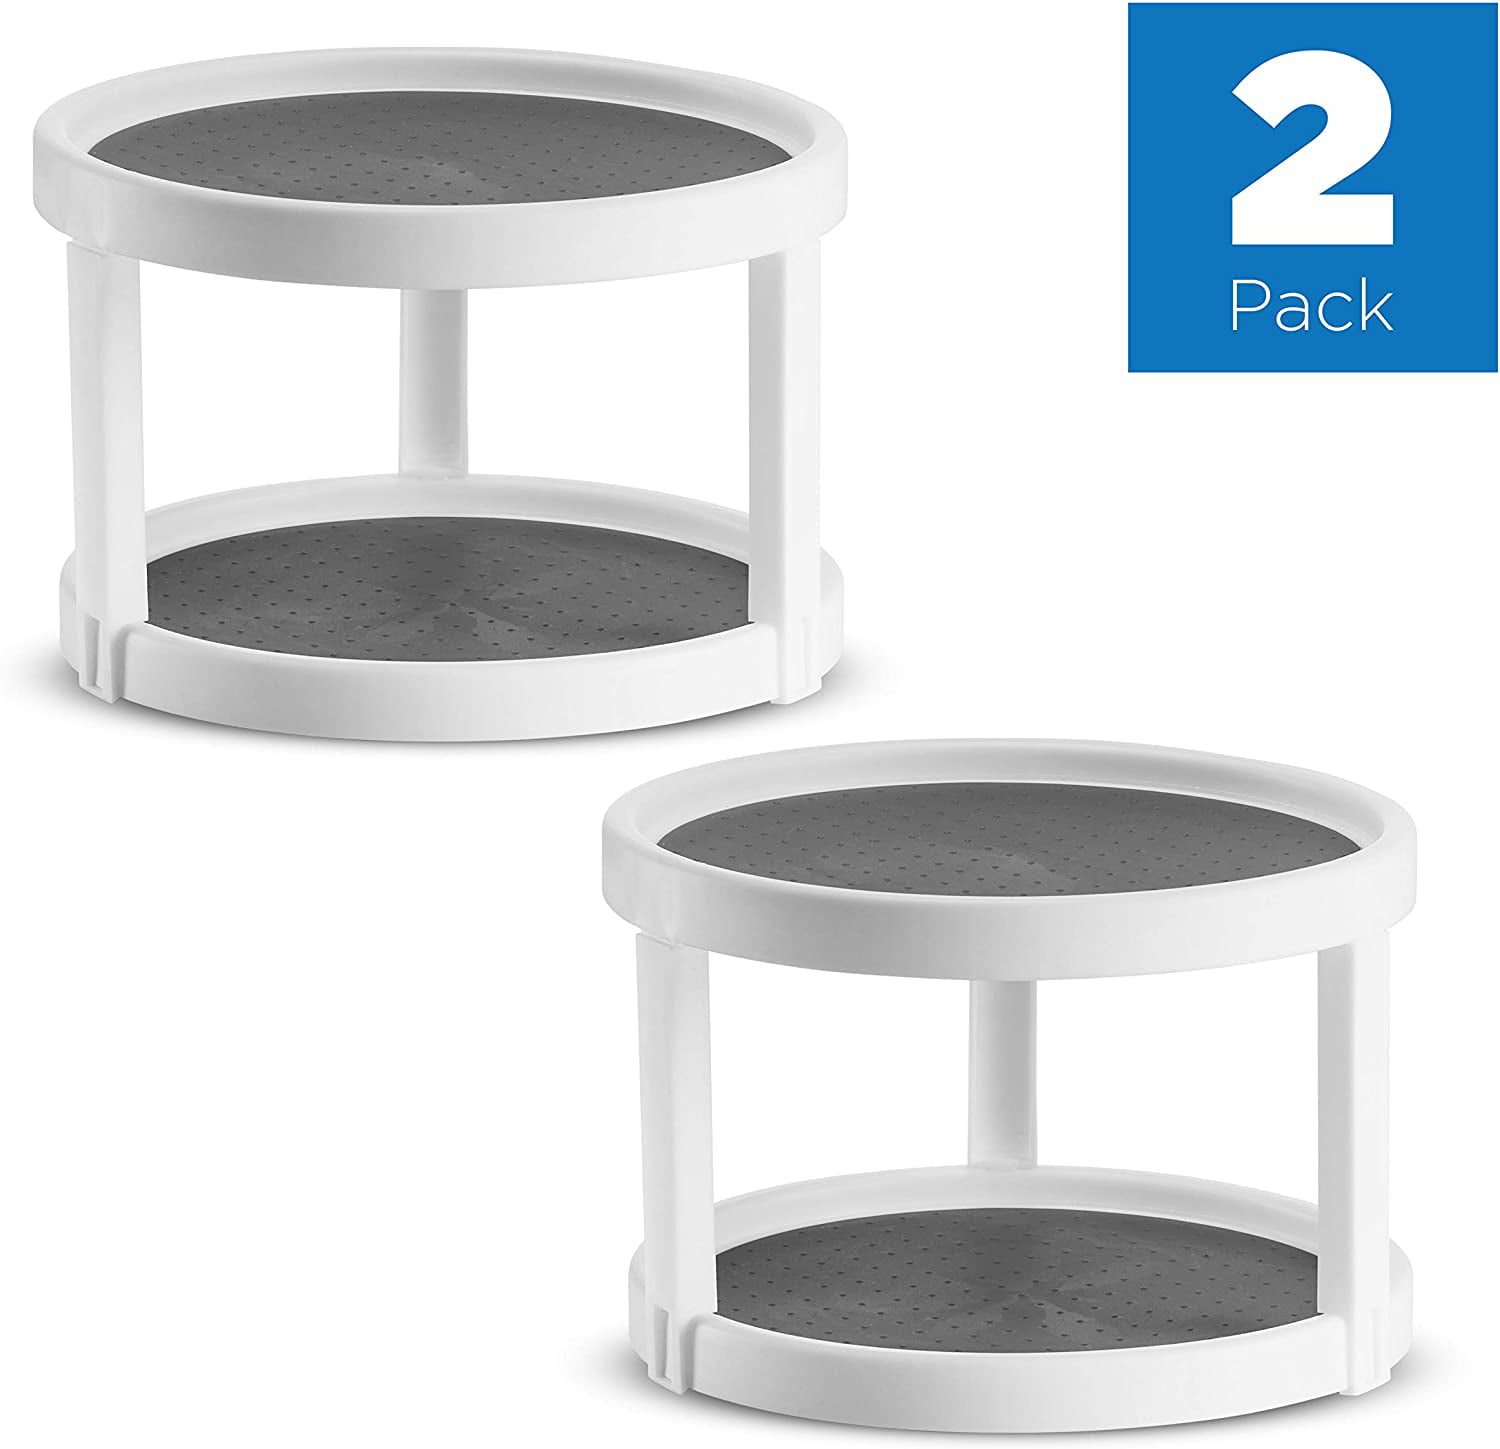 Vanity Display Stand White/Gray Countertop 360 Degree Rotating Spice Rack 10 Inch Spinning Carasoul Pantry 2 Pack Non Skid Lazy Susan Turntable Cabinet Organizer Kitchen 